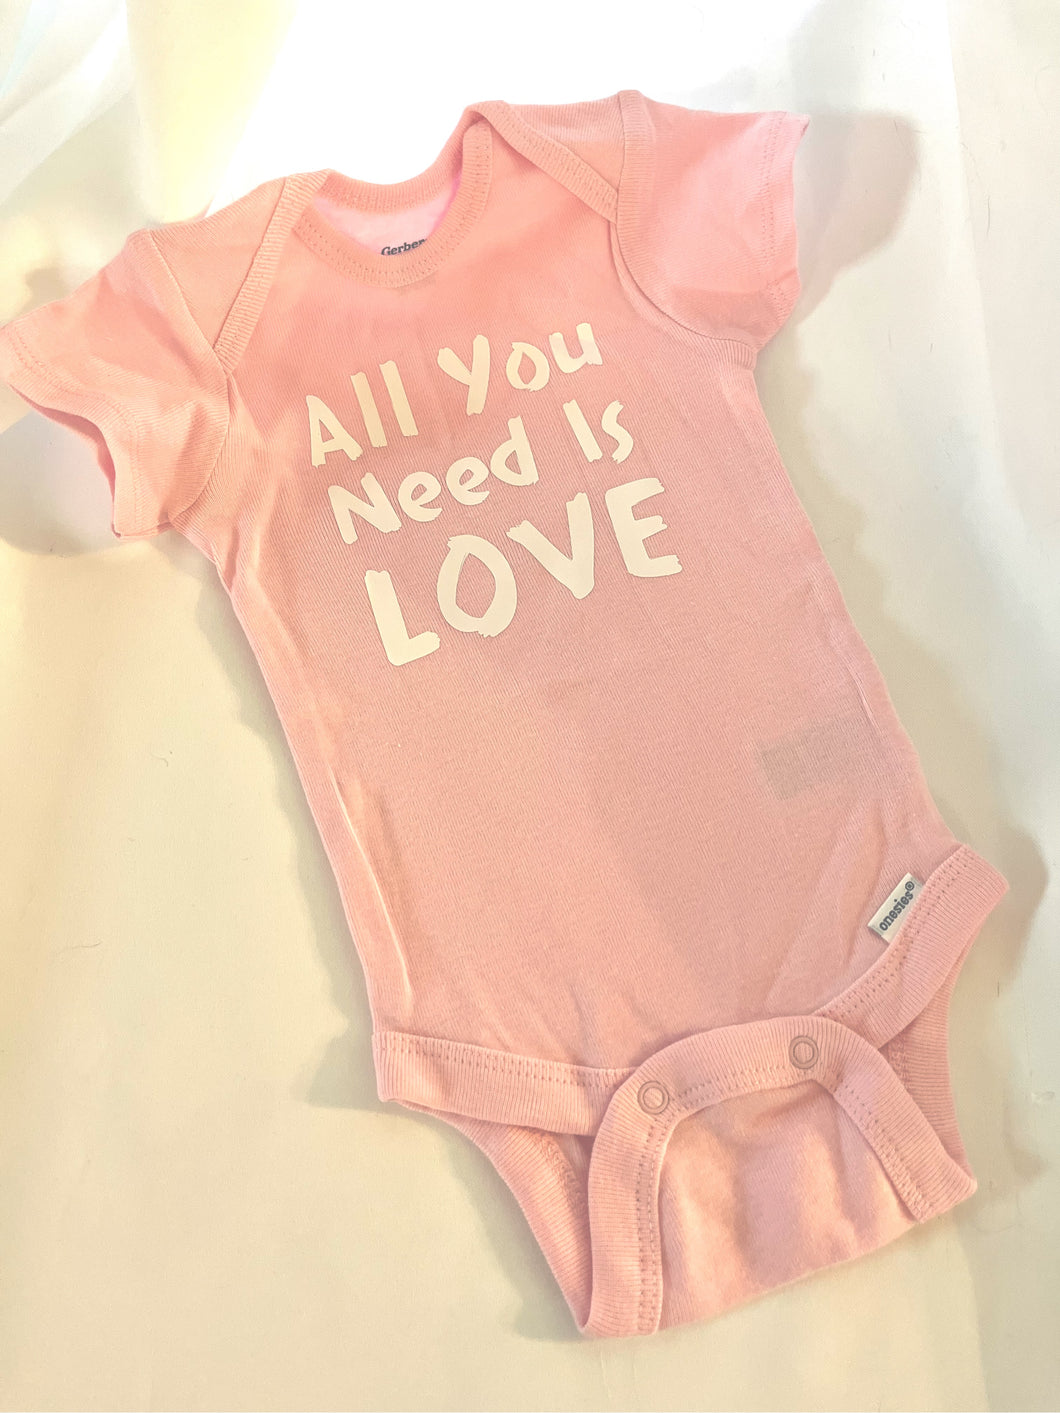 All You Need Is Love Onesie (Pink)